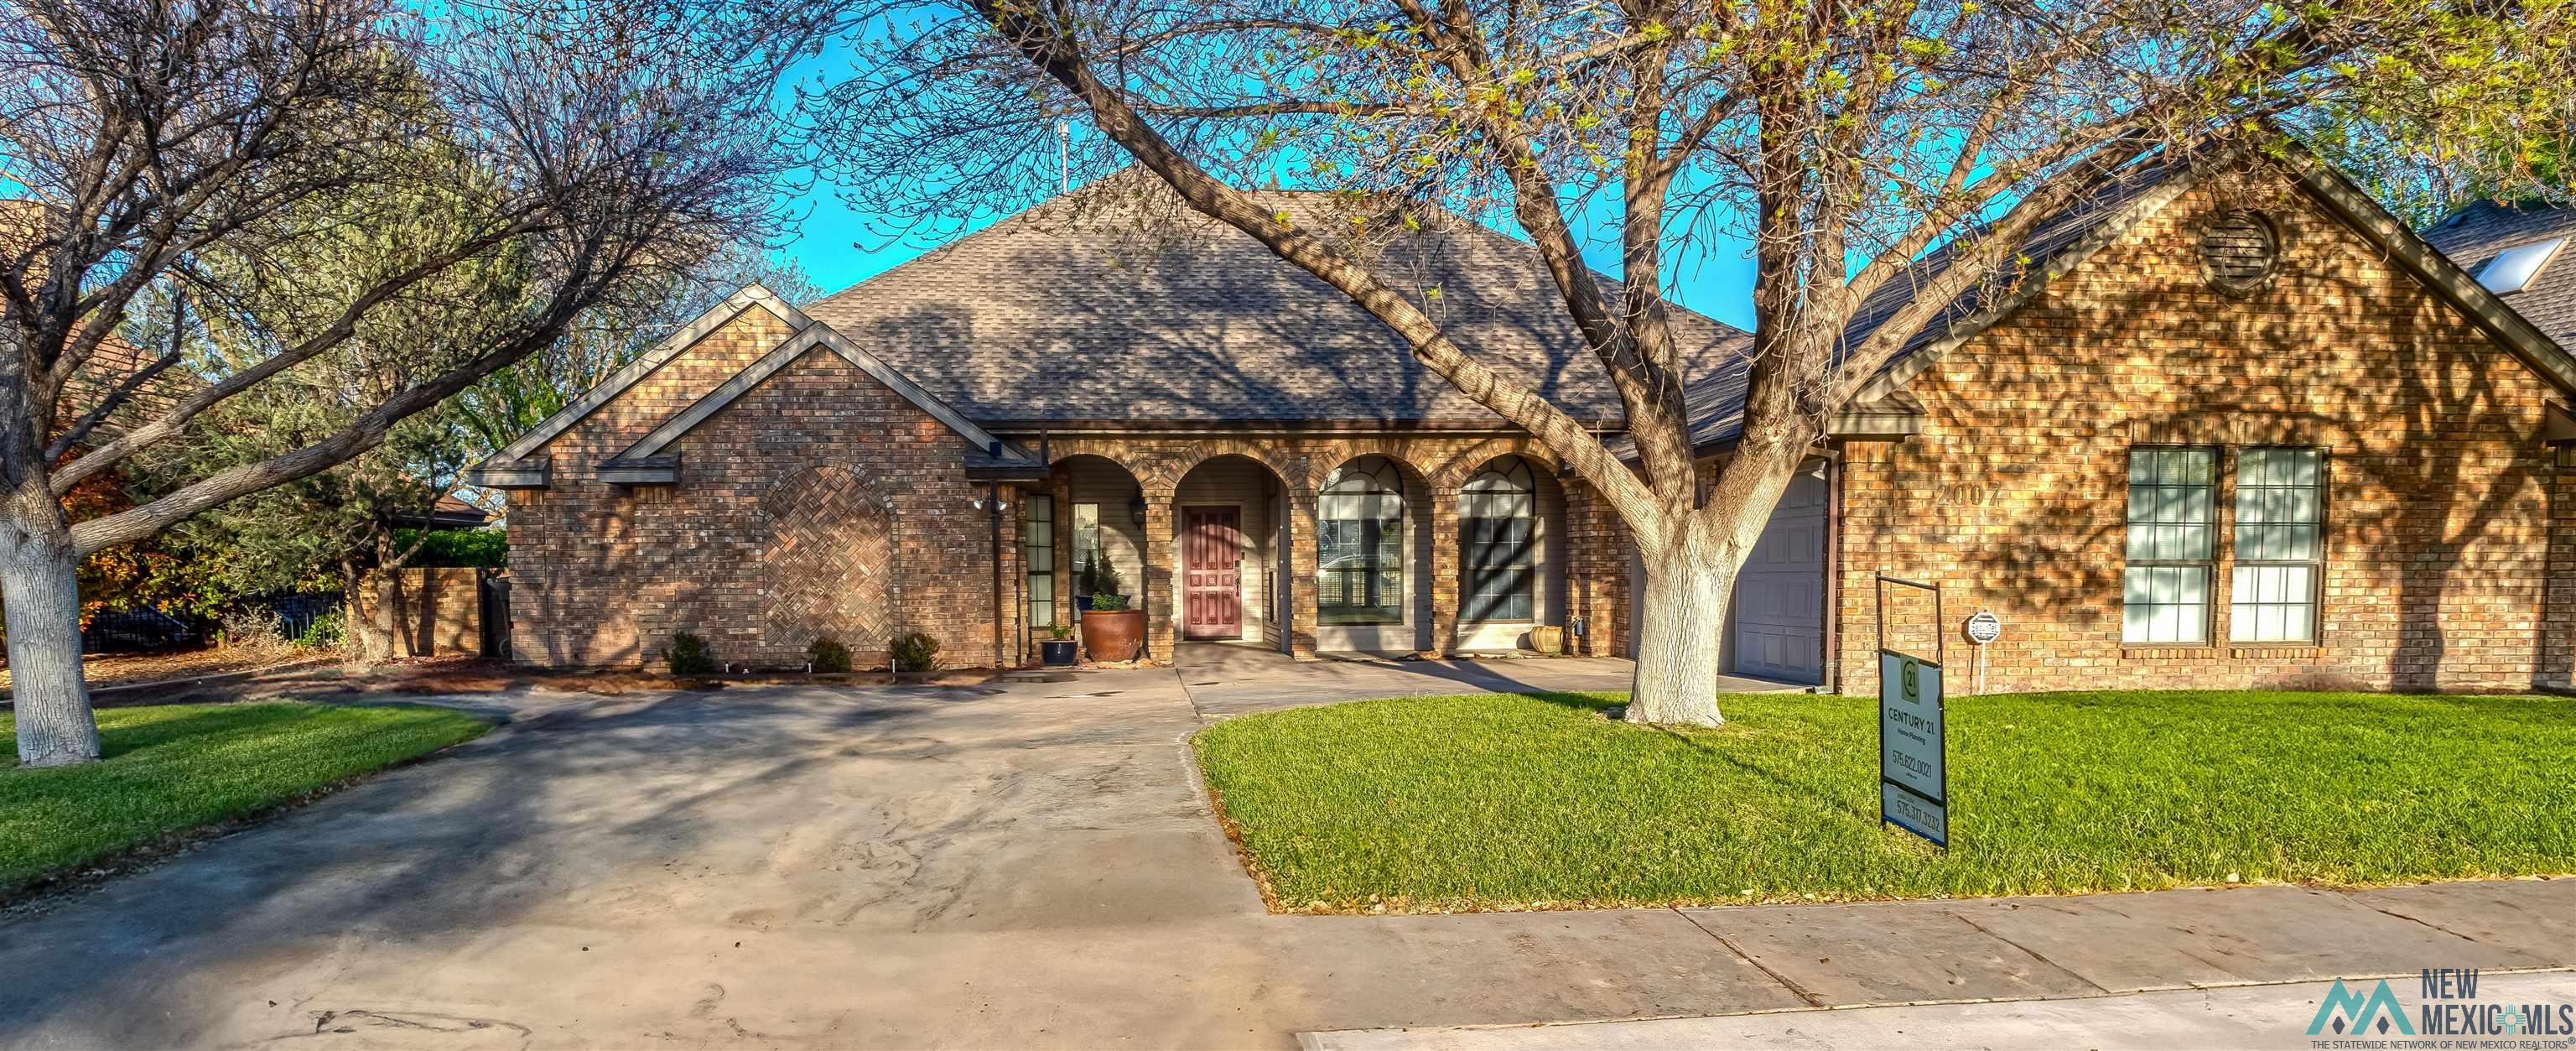 Property Image for 2007 Brazos